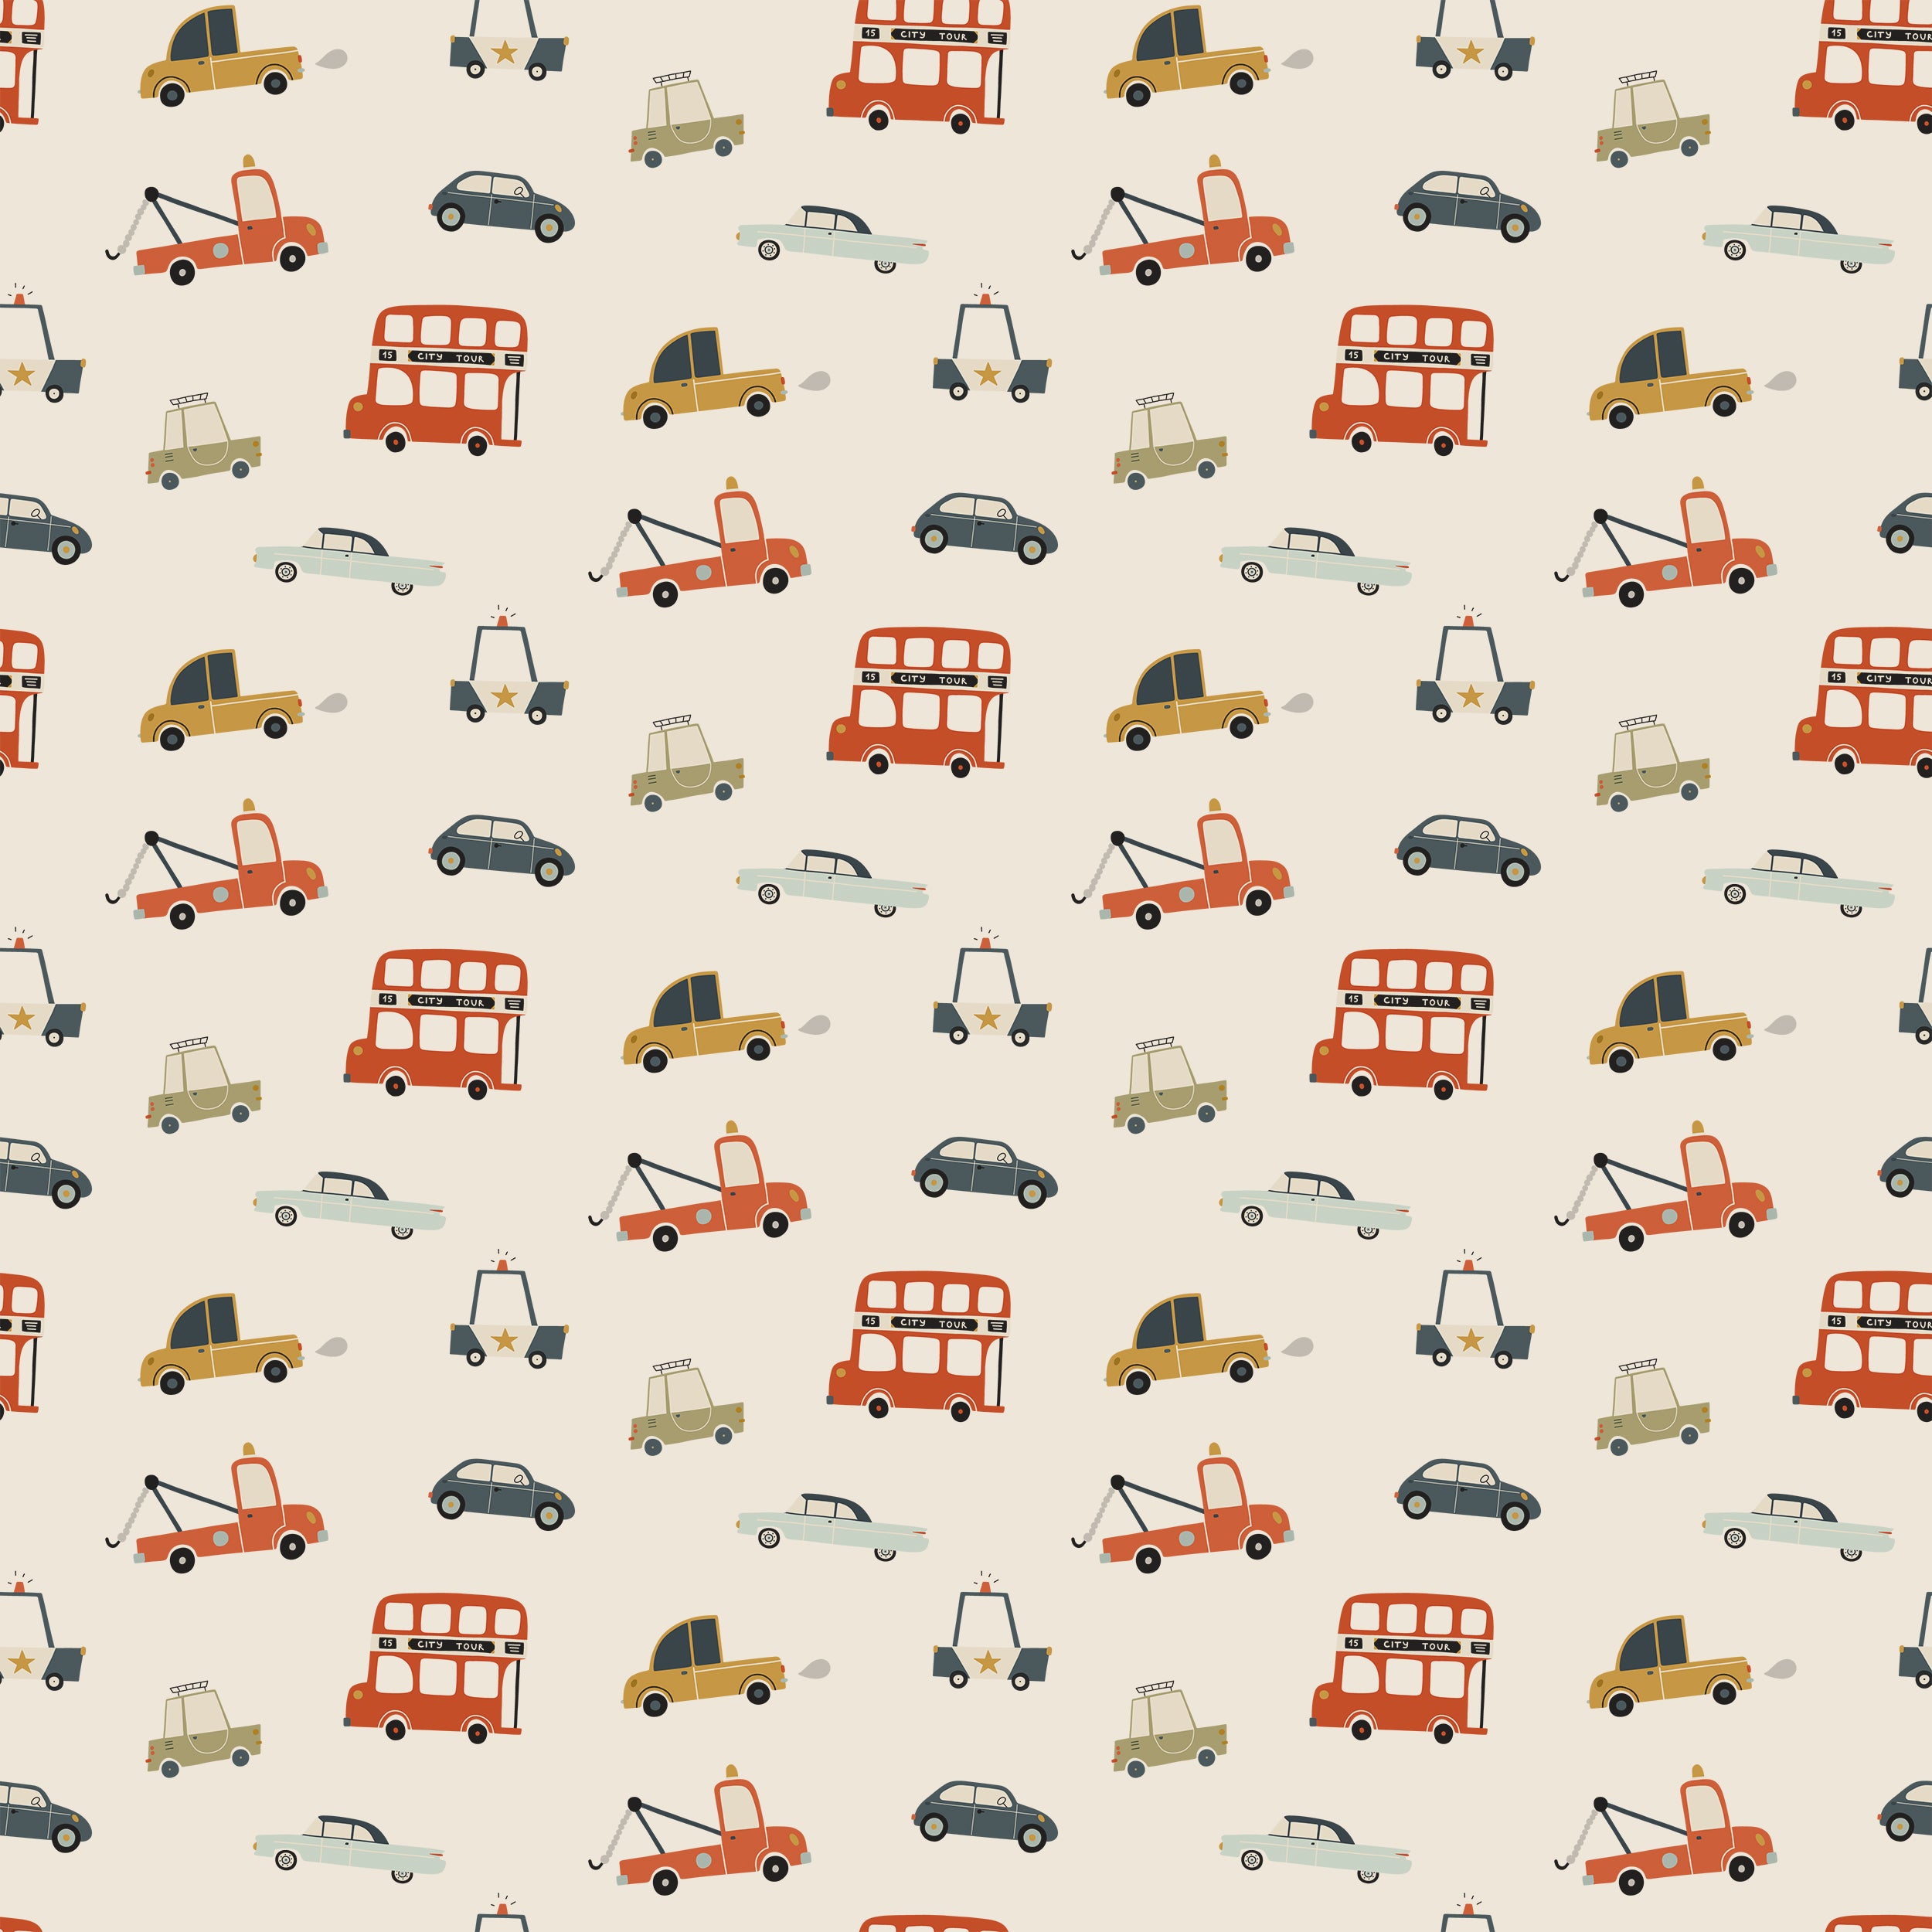 A playful and colorful pattern featuring vintage-inspired trucks and cars in shades of red, yellow, and blue on an ecru background. The Cute Trucks and Cars Wallpaper showcases various vehicles, including double-decker buses and tow trucks, creating a lively atmosphere suitable for children's spaces.